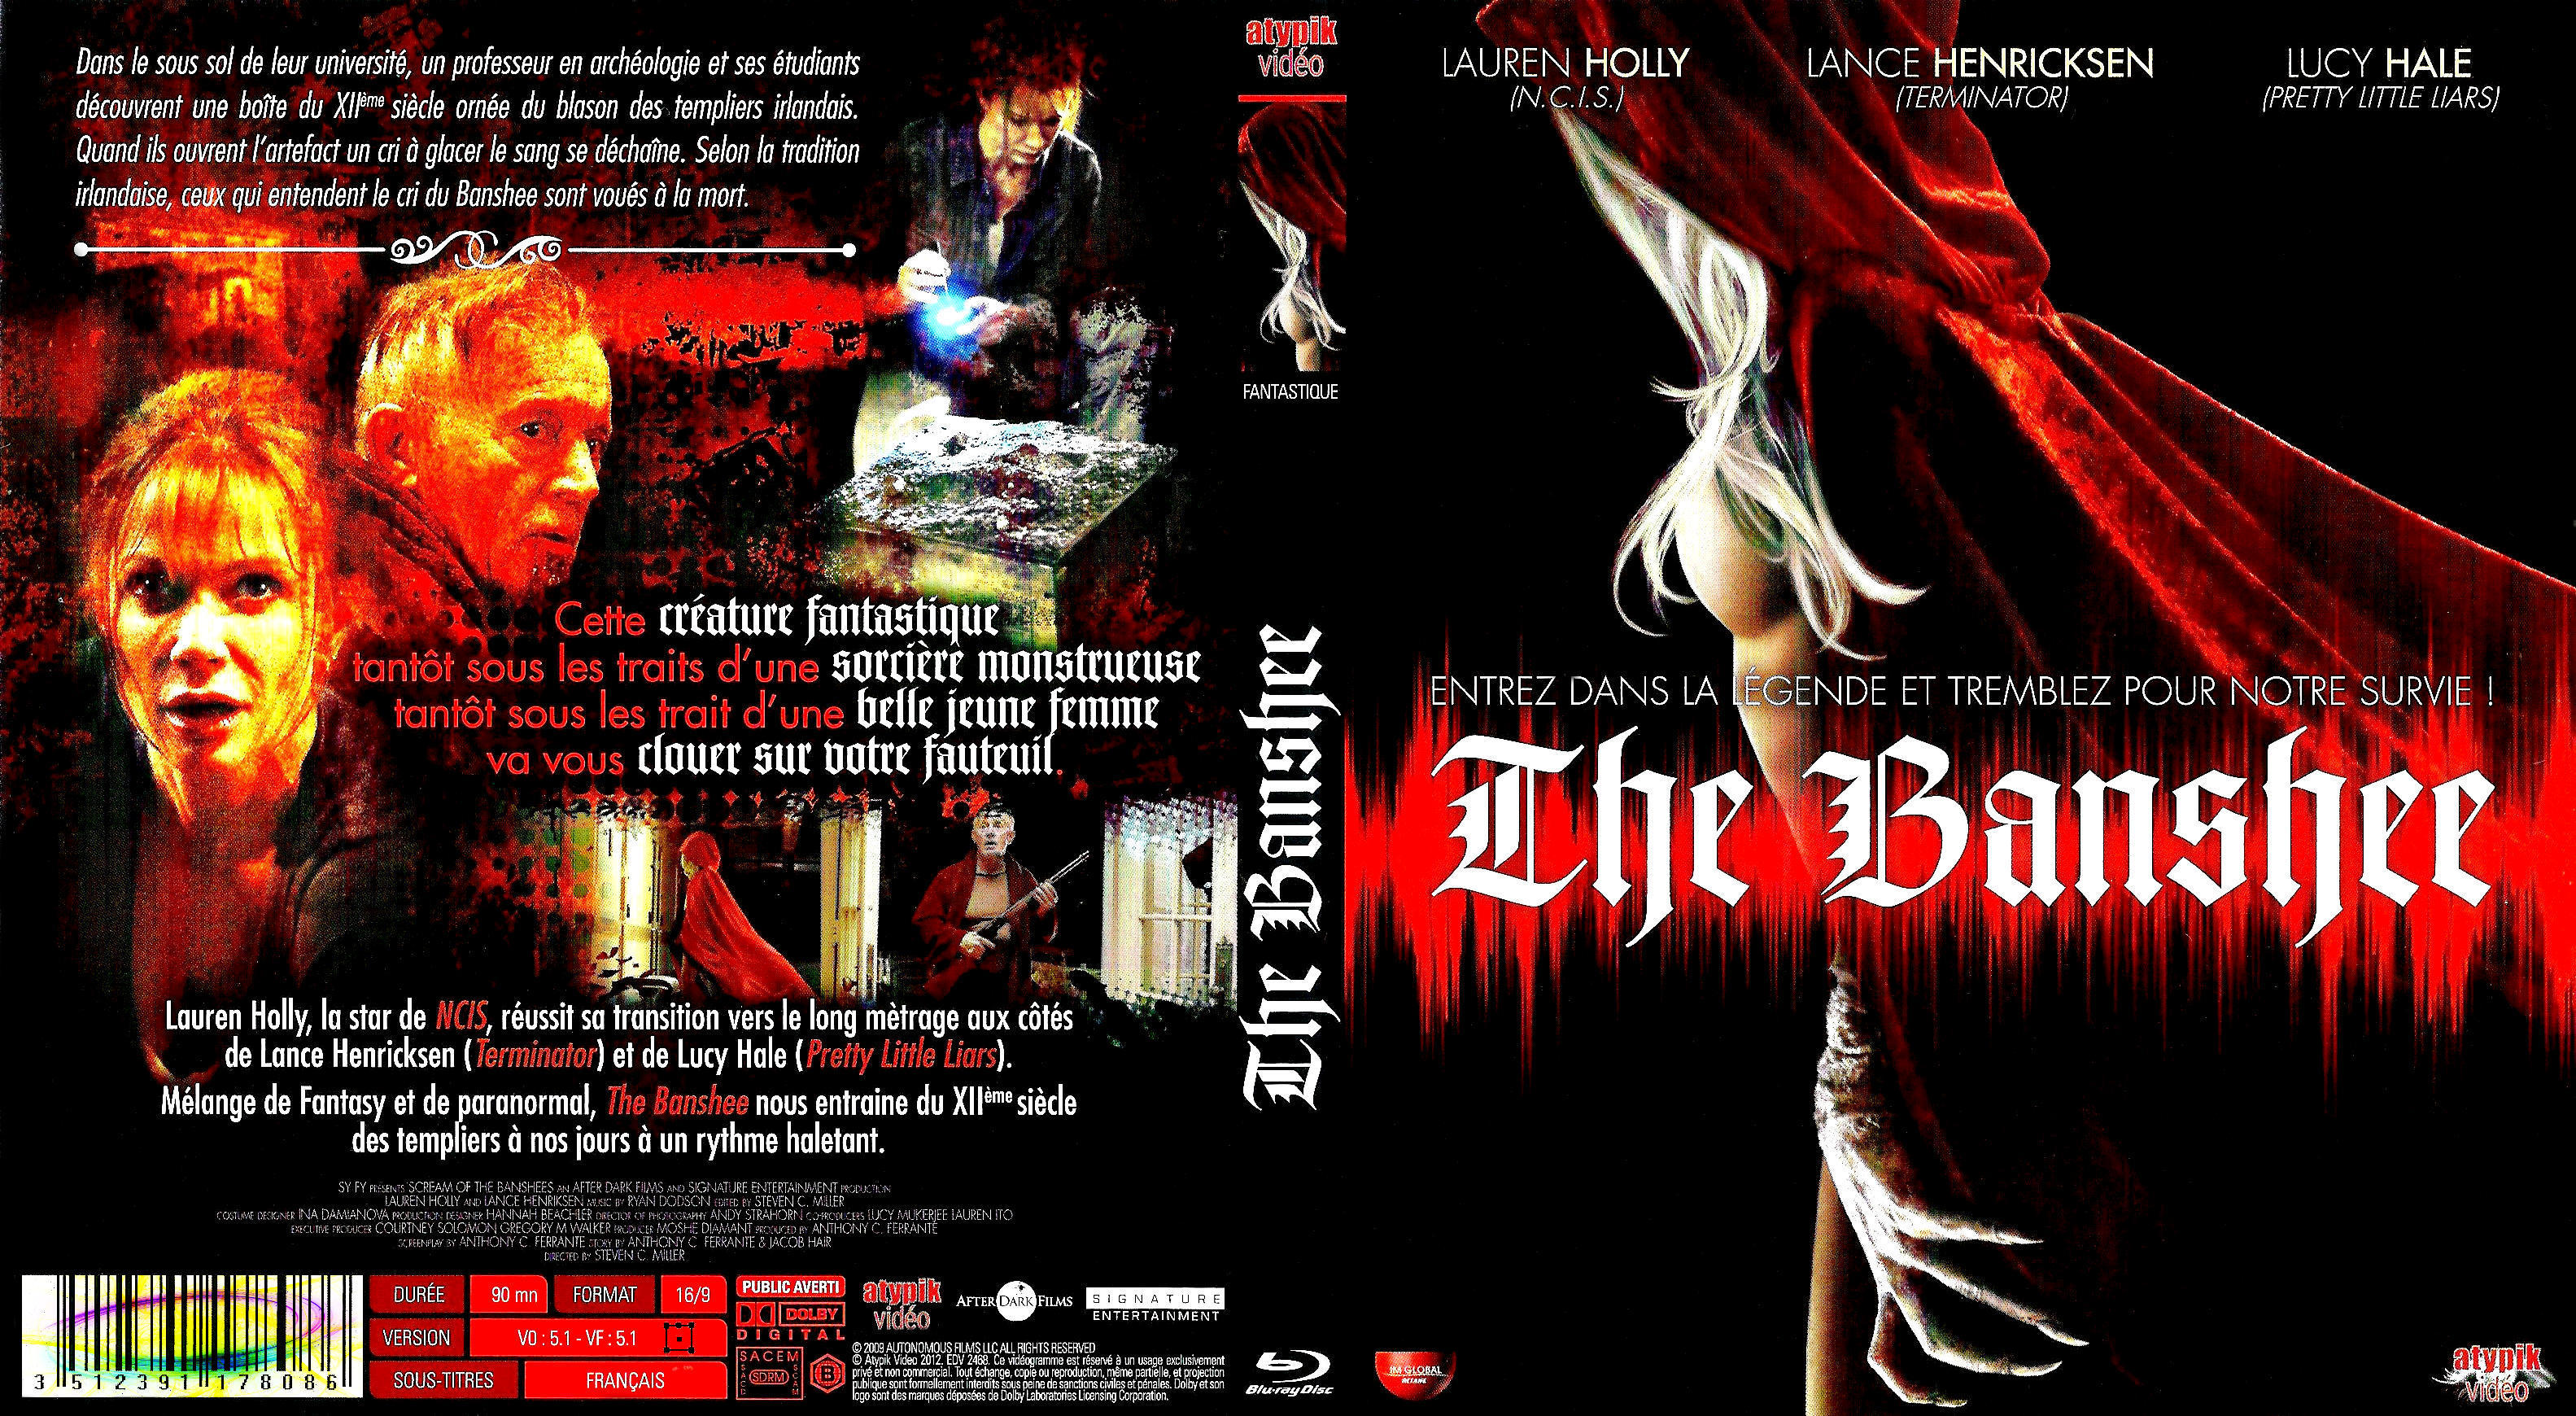 Jaquette DVD The banshee (BLU-RAY)